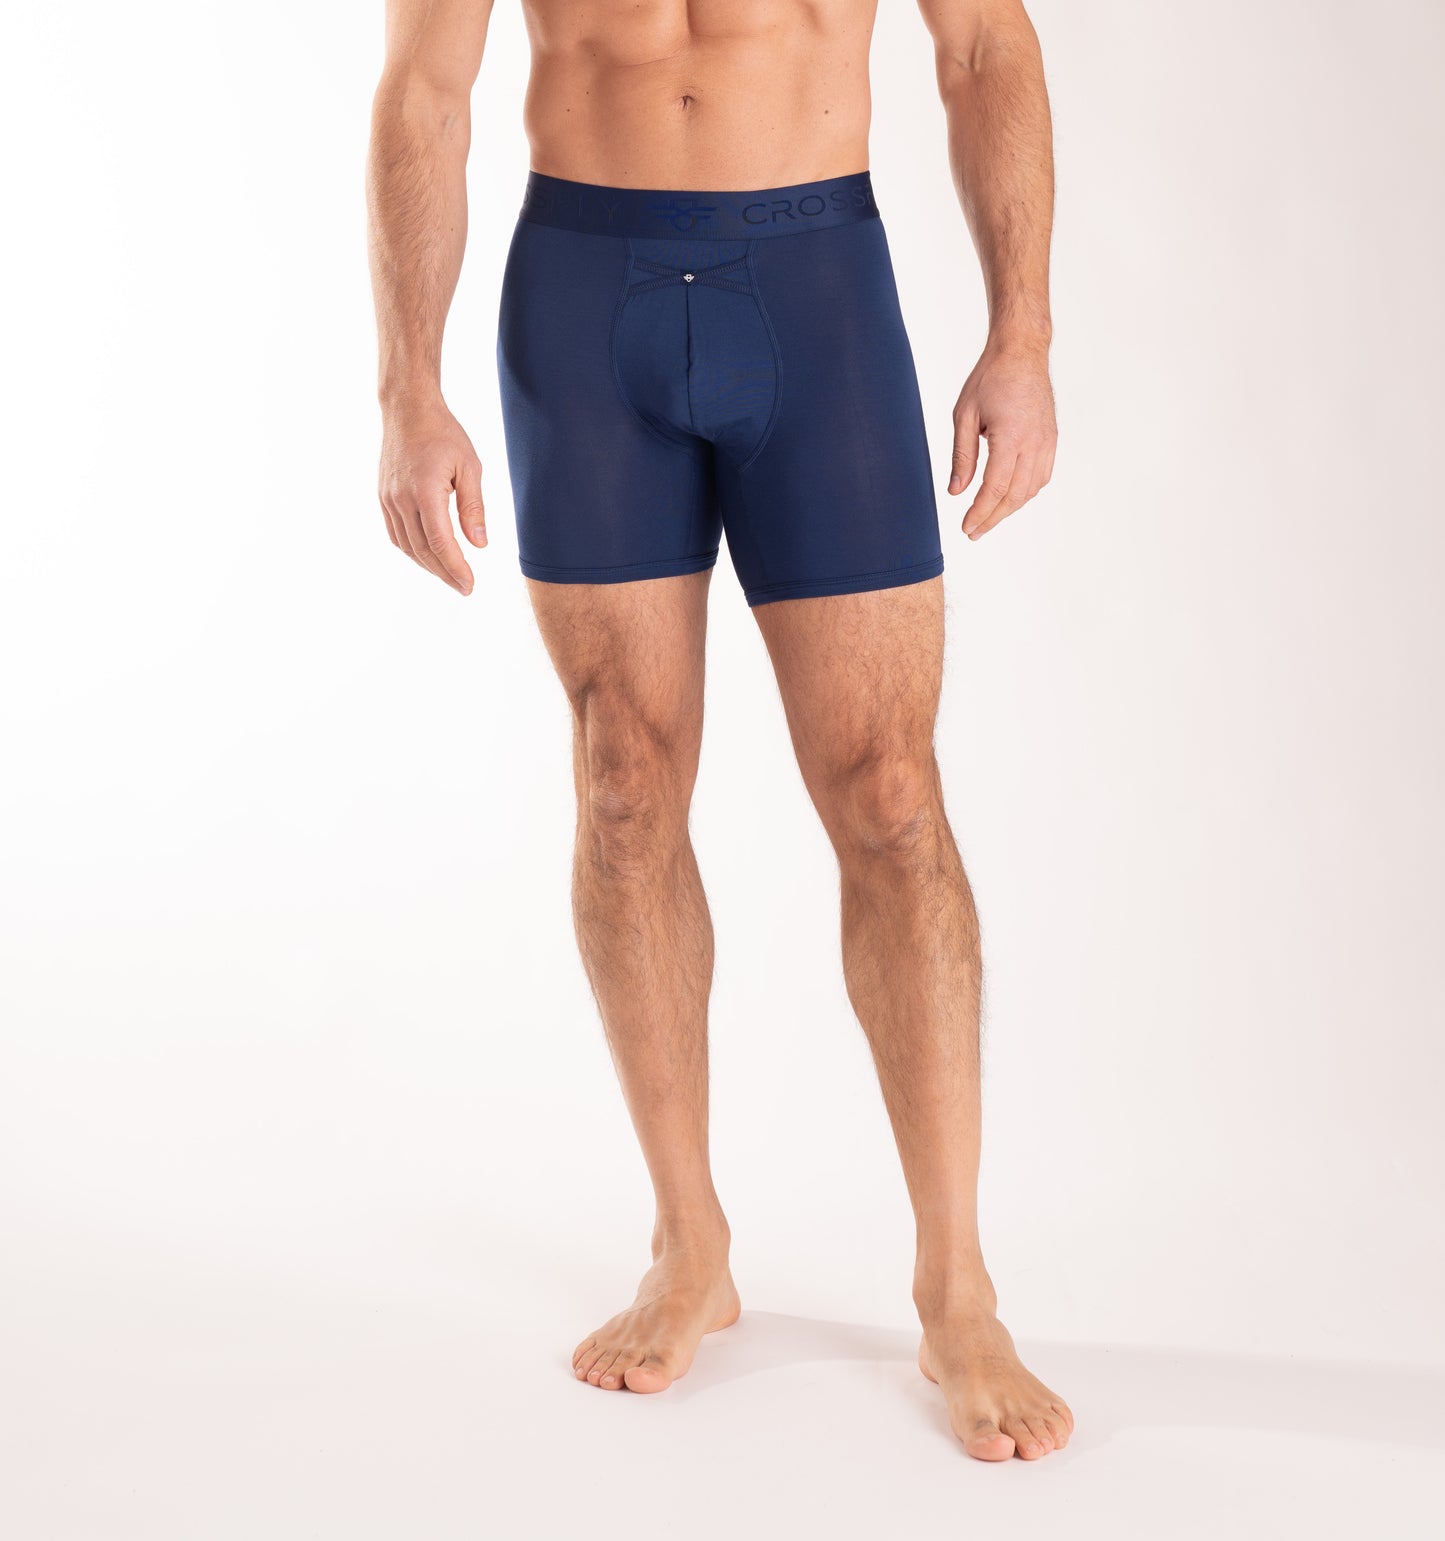 Crossfly men's IKON 6" navy boxers from the Everyday series, featuring X-Fly and Coccoon internal pocket support.